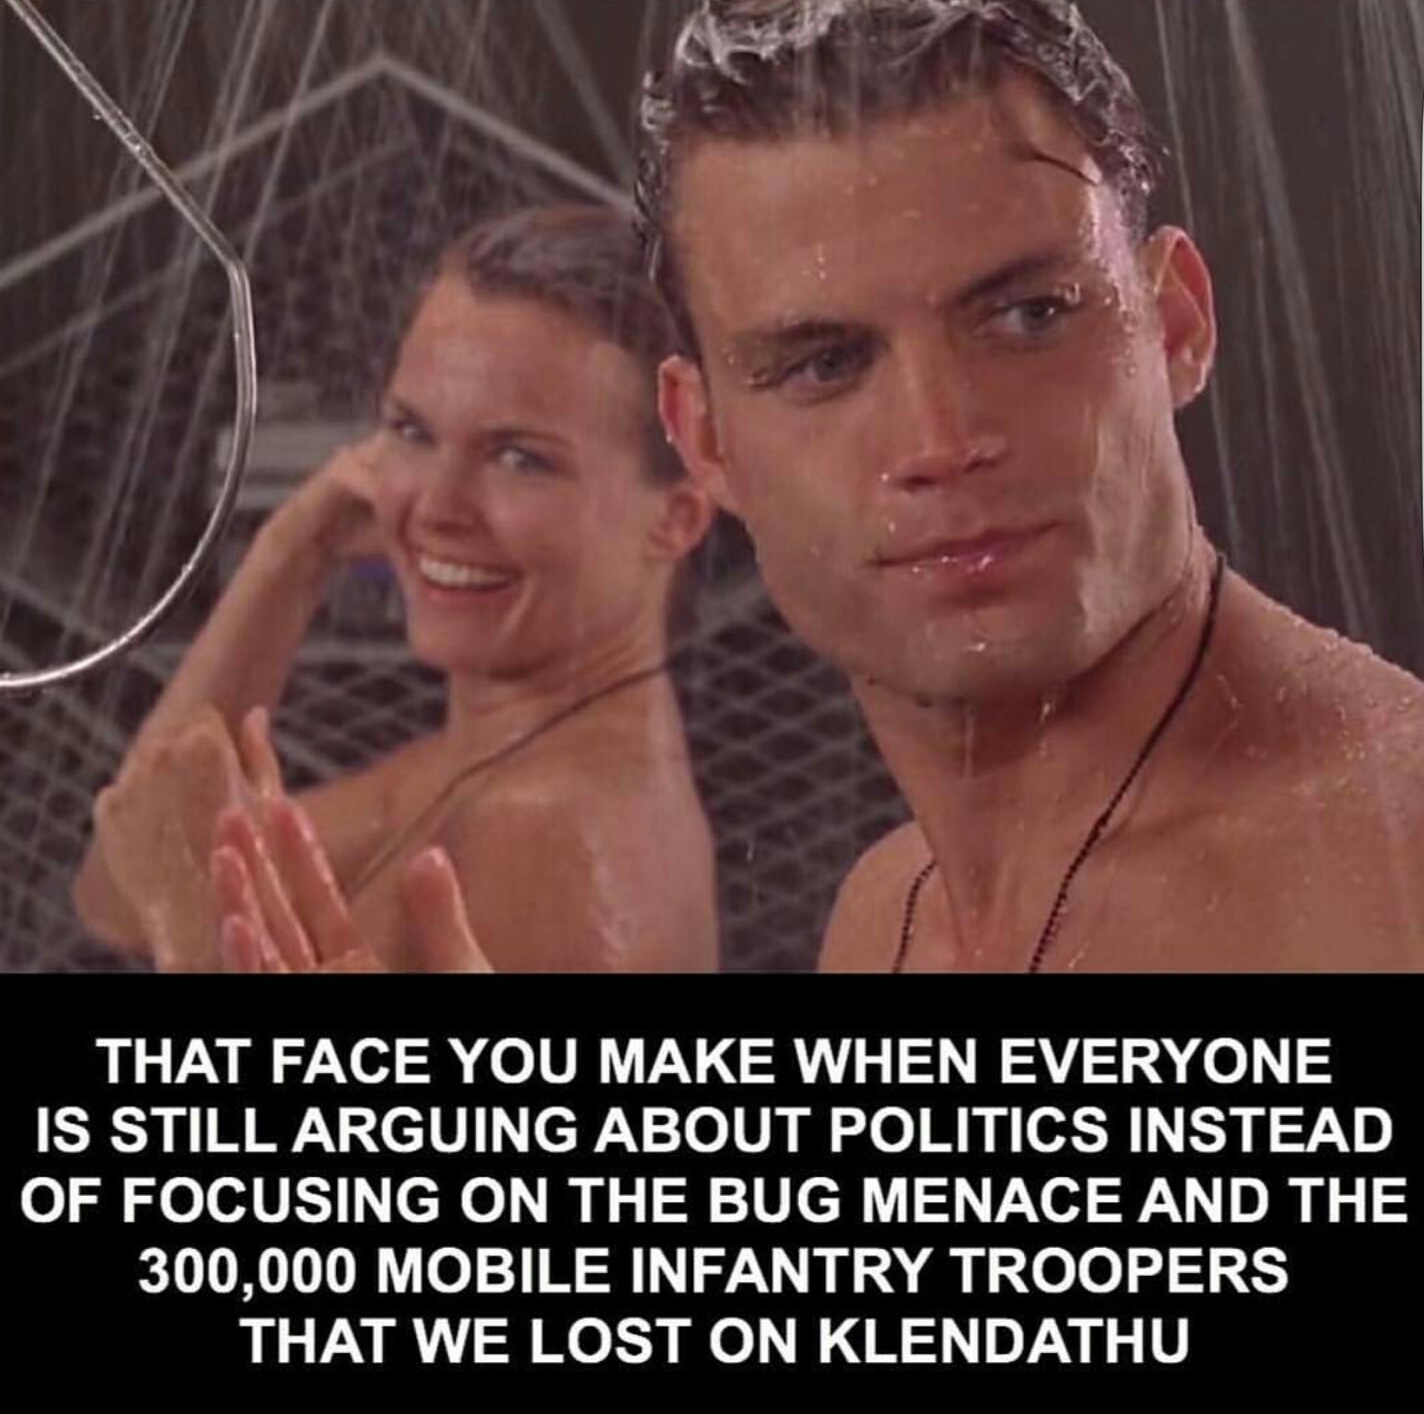 would you like to know more starship troopers - That Face You Make When Everyone Is Still Arguing About Politics Instead Of Focusing On The Bug Menace And The 300,000 Mobile Infantry Troopers That We Lost On Klendathu